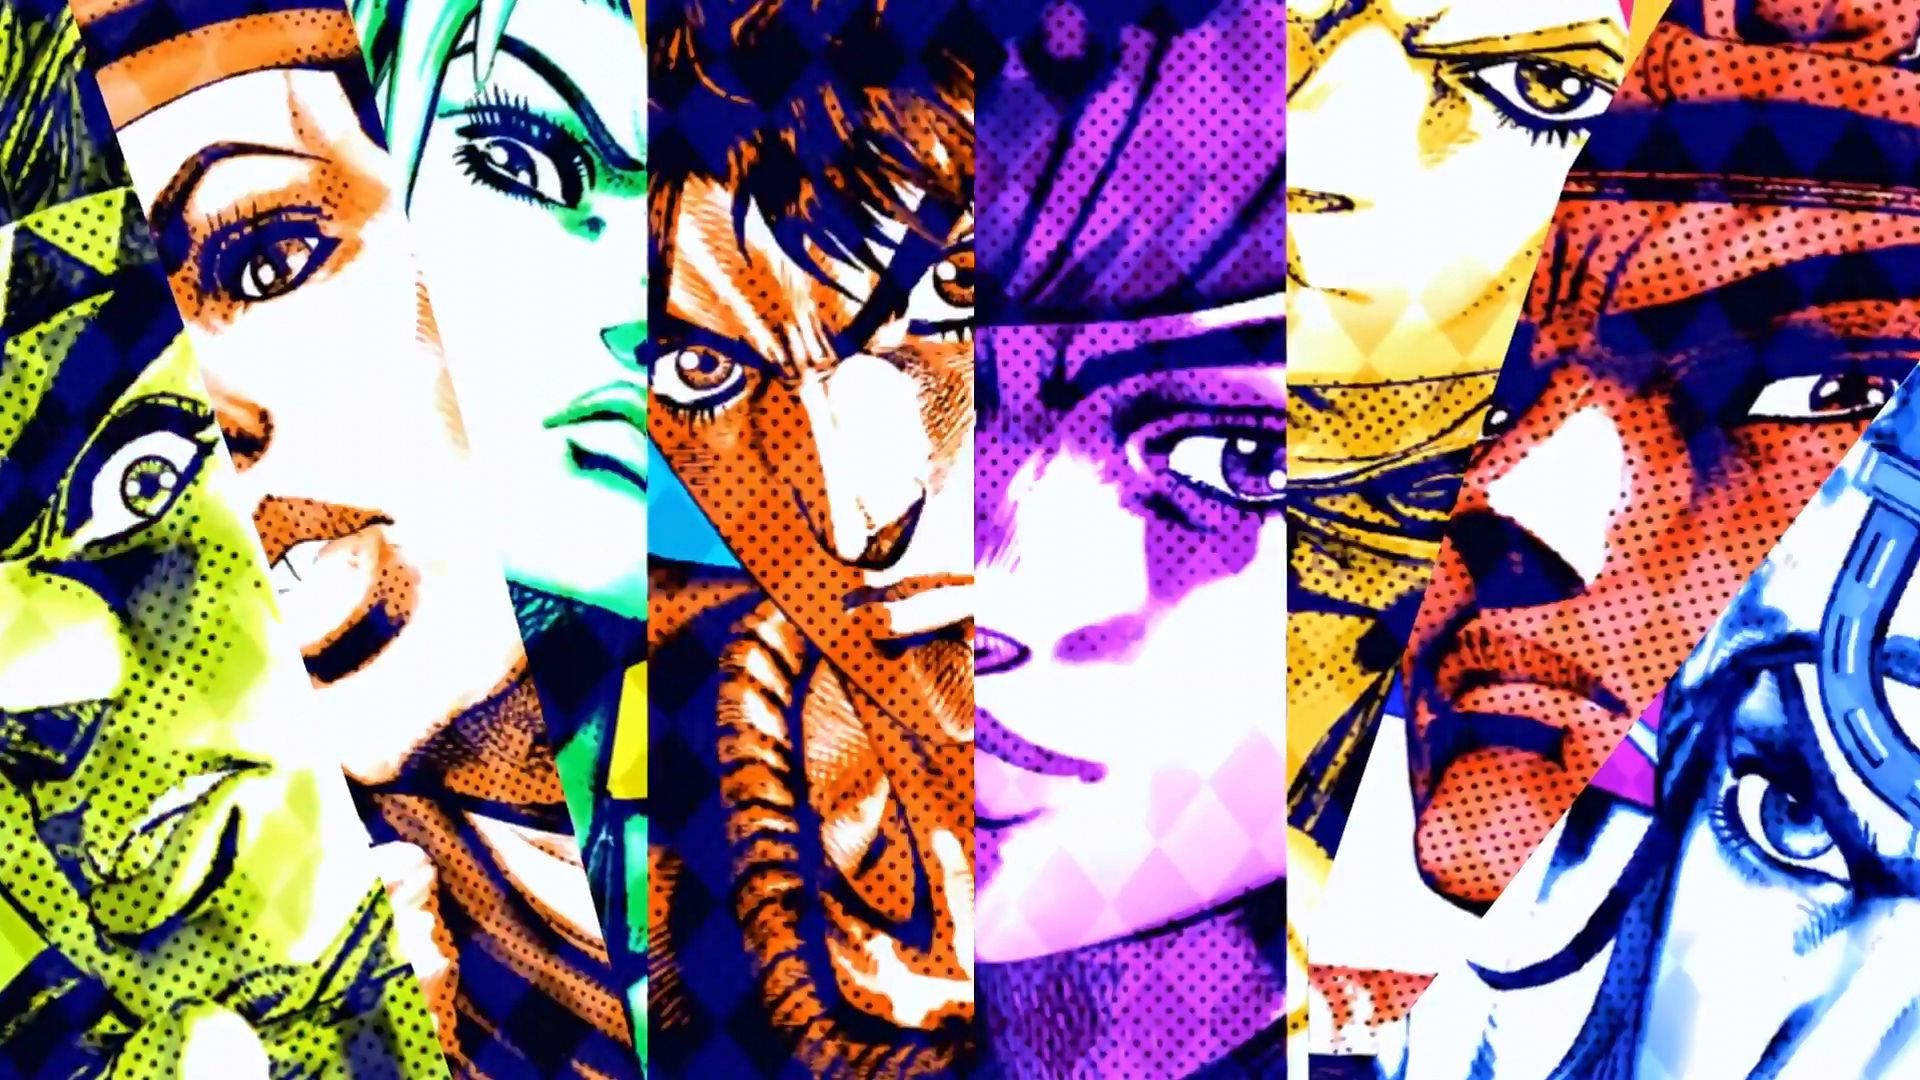 “Her Stand Power Is Undeniable” Wallpaper